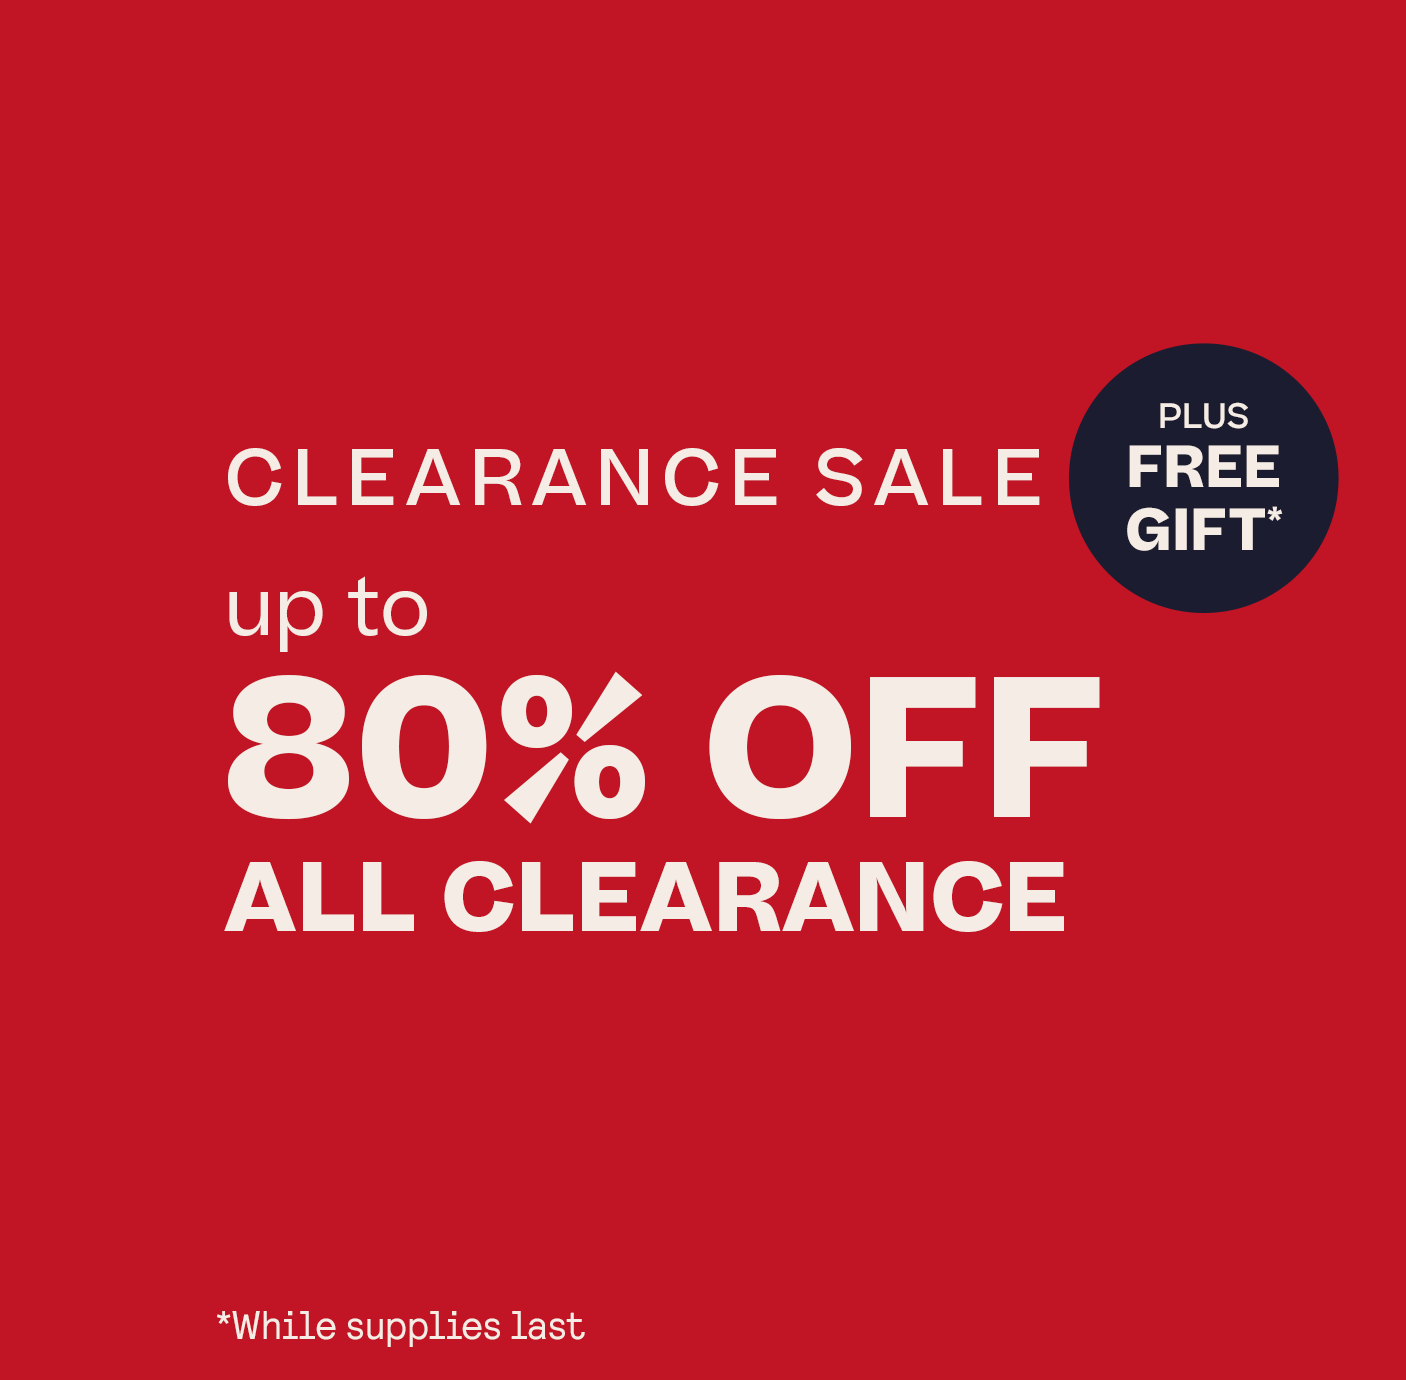 Up to 80% Off Clearance